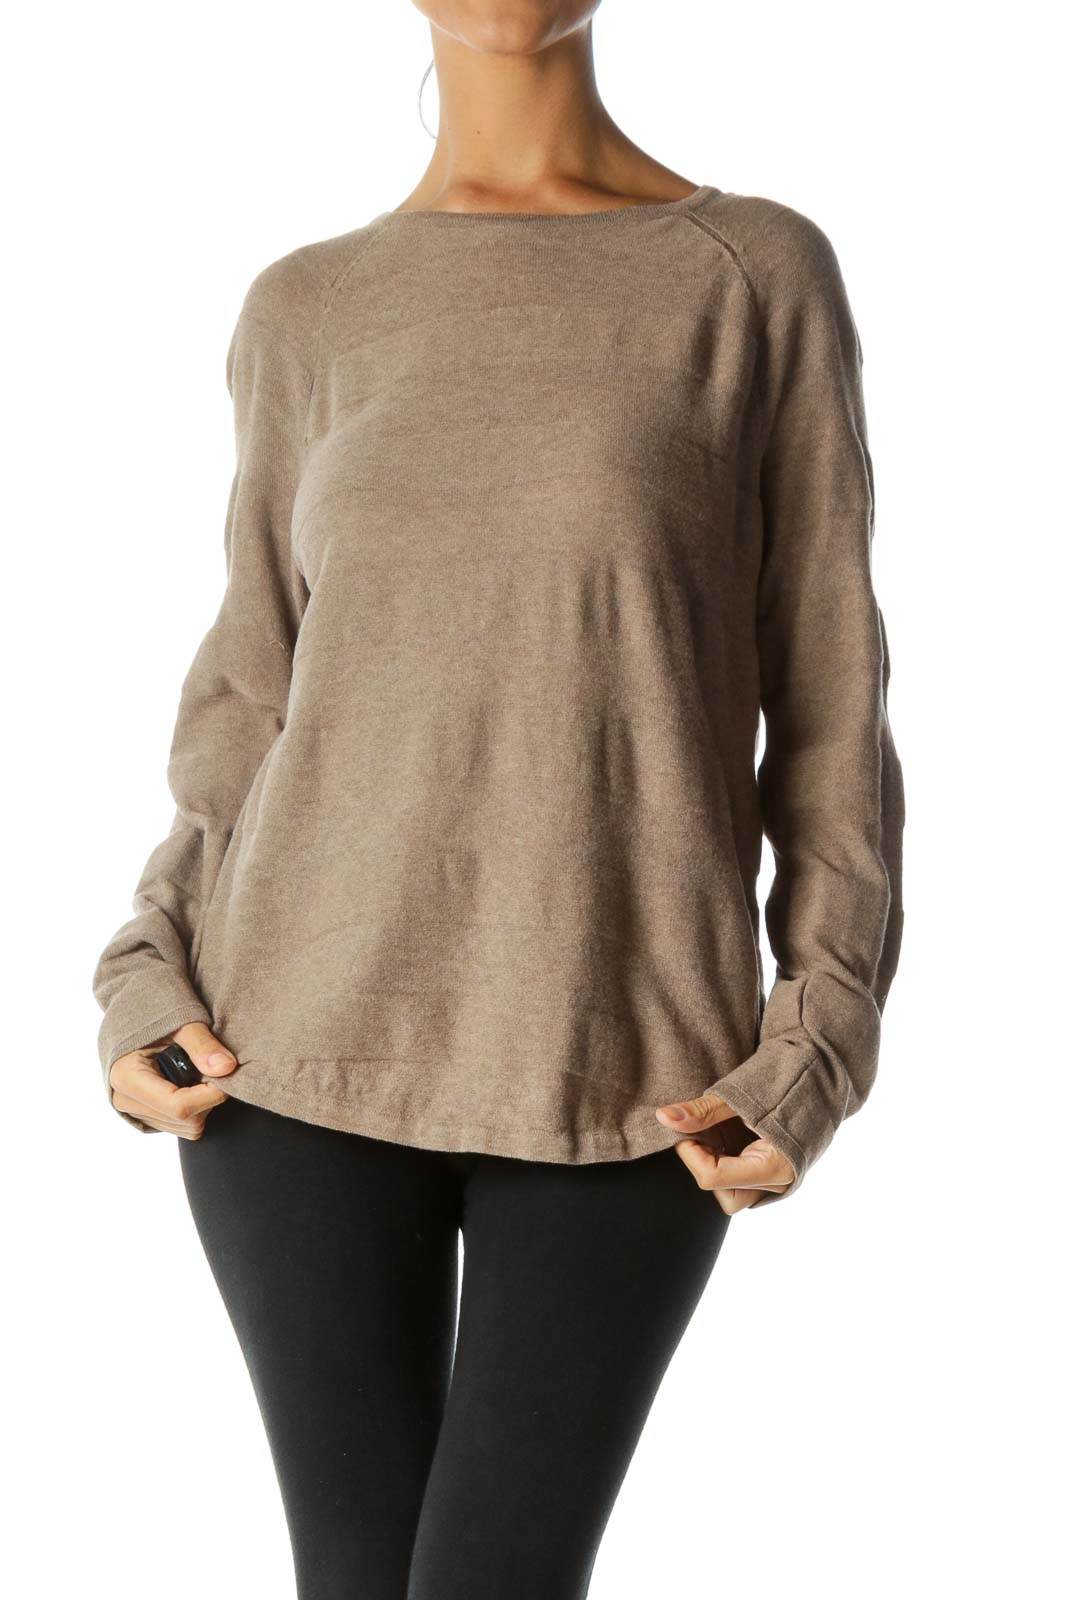 Beige Raised-Textured-Thick-Stripes Detail 100% Cotton Pull-On Sweater Front